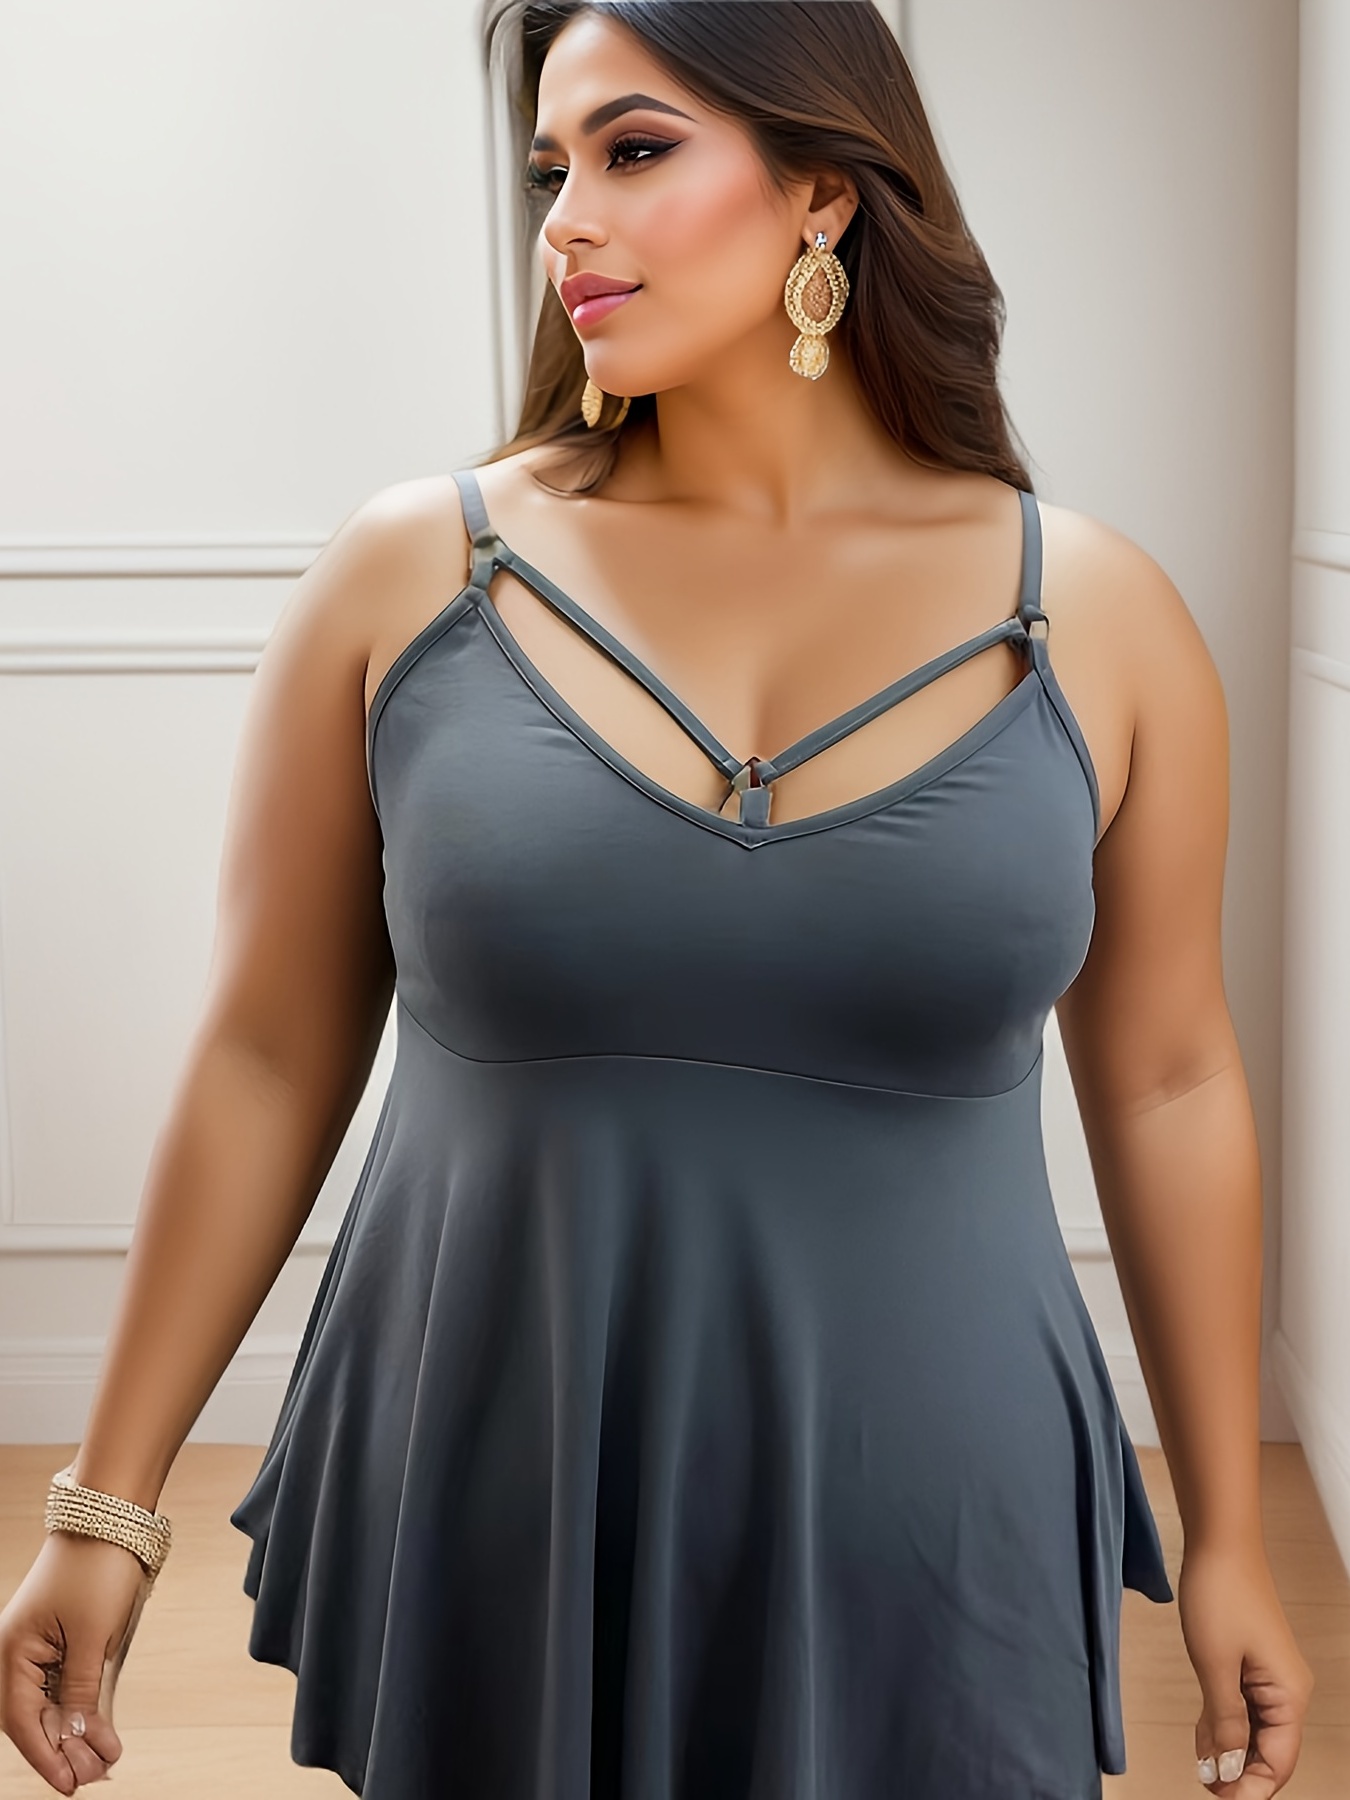 Sexy plus size tops